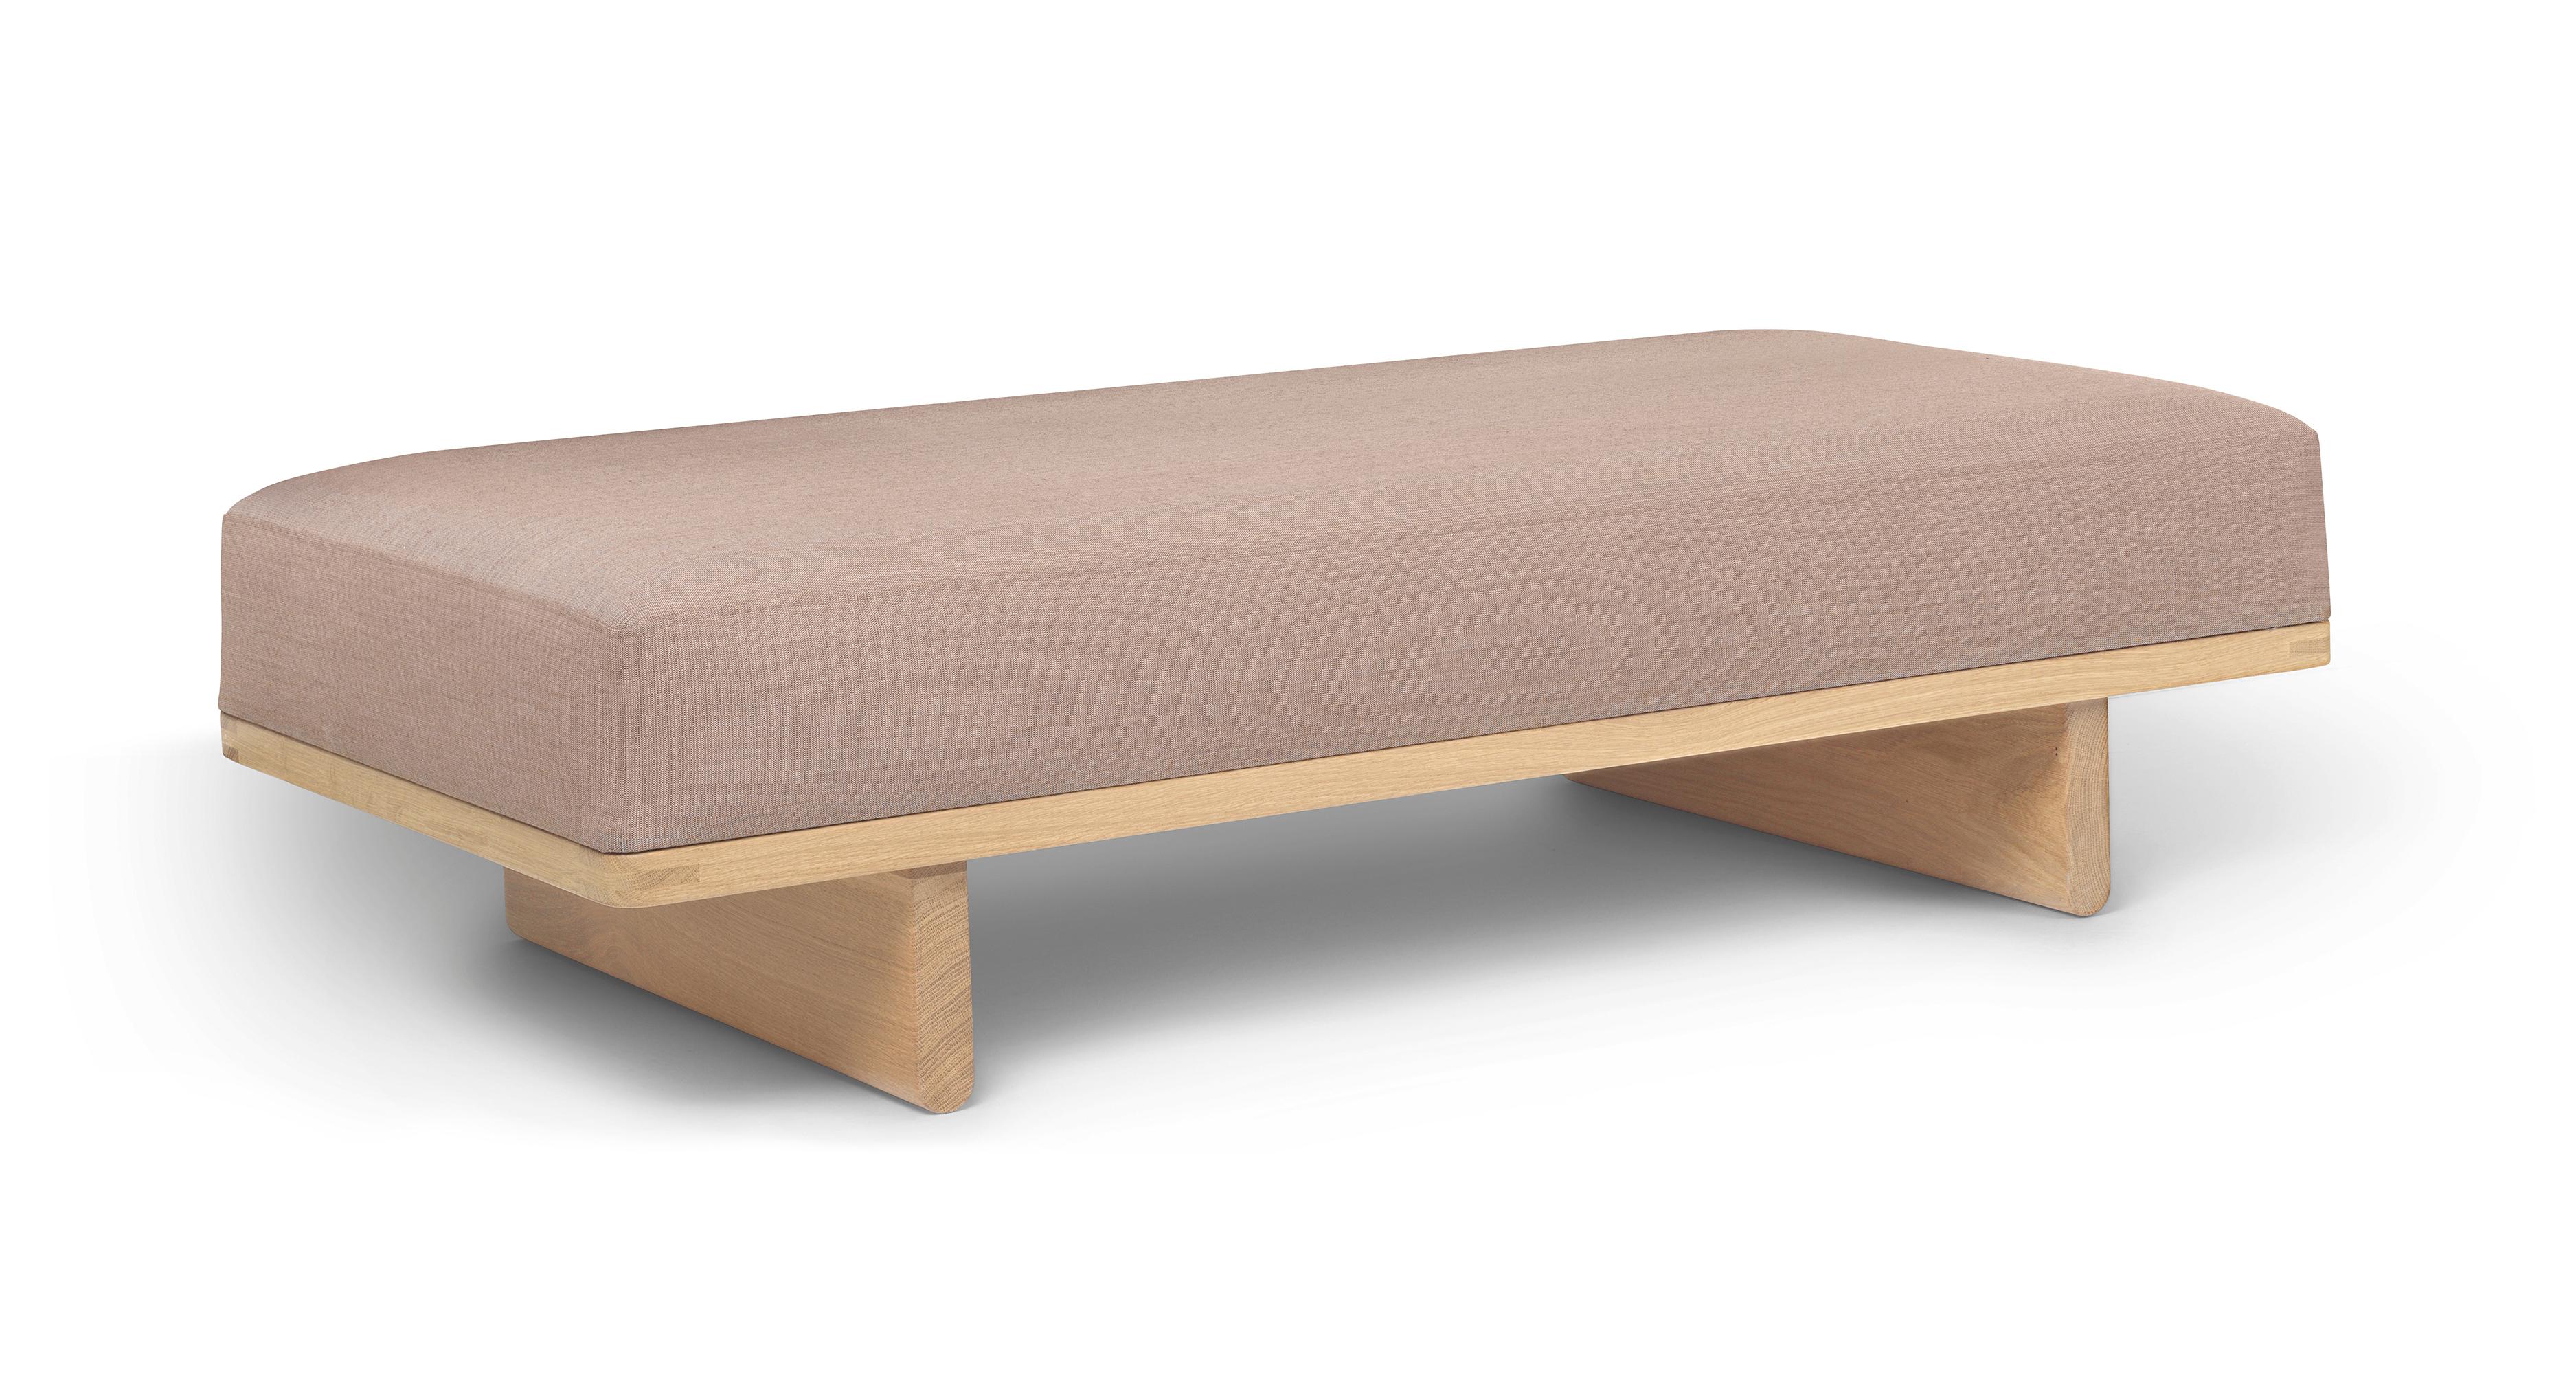 Børge Mogensen’s BM0865 daybed, a modular, playful and highly versatile design in FSC-certified (FSC-C135991) wood, was originally designed in 1958 and is now reintroduced by Carl Hansen & Søn.

Every piece of furniture produced by Carl Hansen &